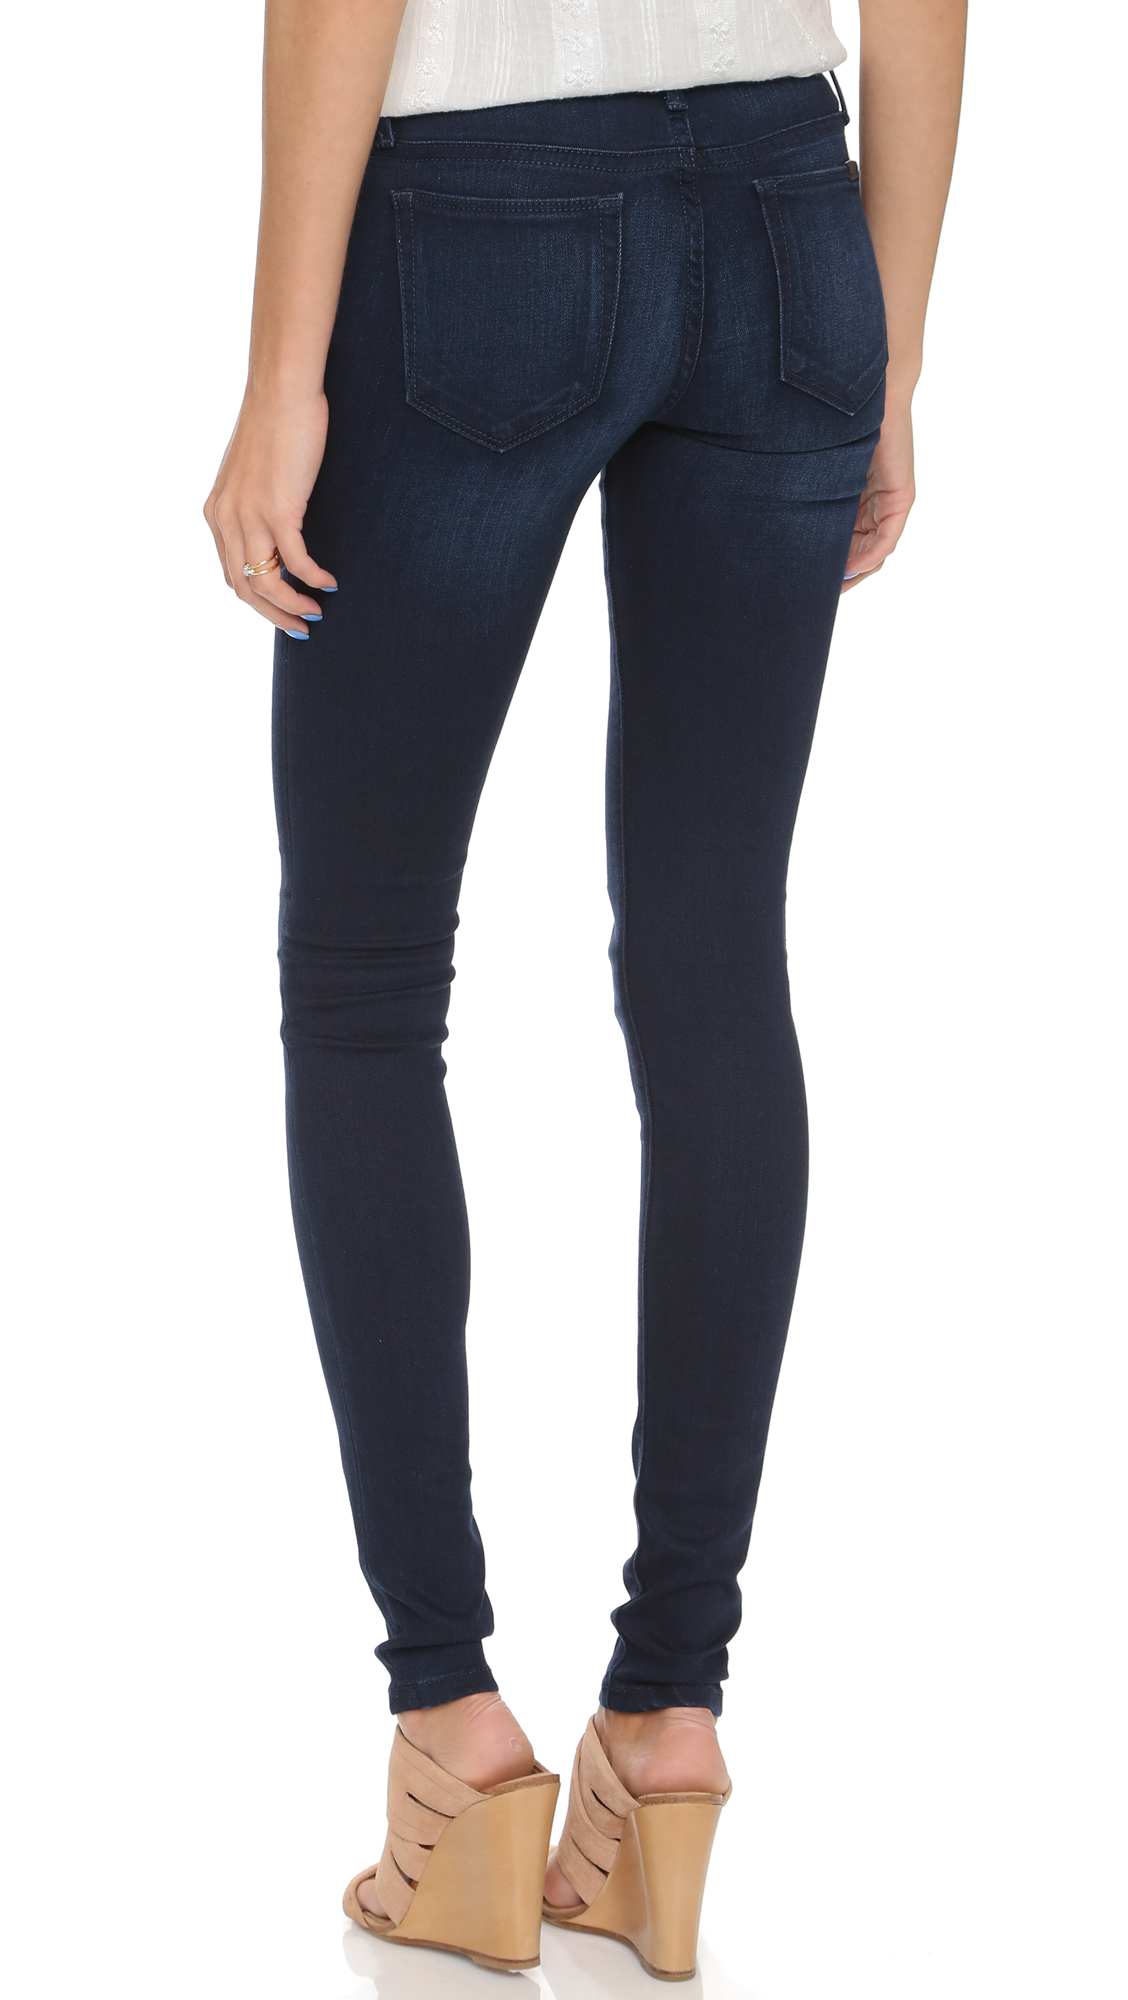 Joes Jeans Womens Flawless Icon Midrise Skinny Jean 